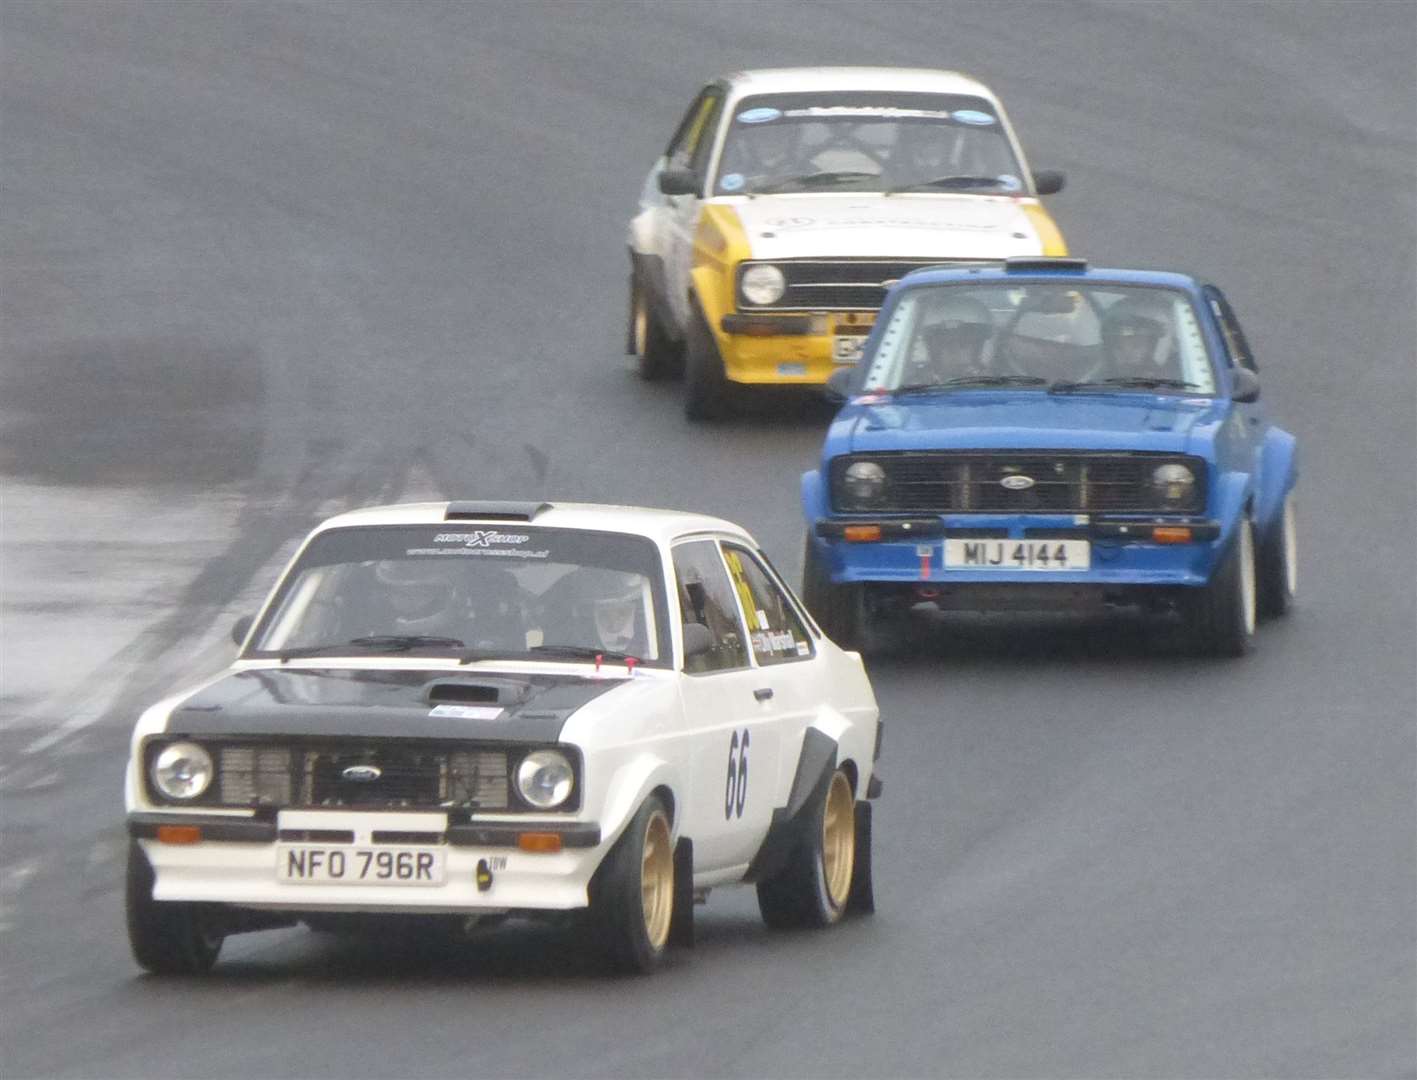 The event attracted 77 competitors, including a number of Ford Escort Mk2s. Picture: Vic Wright